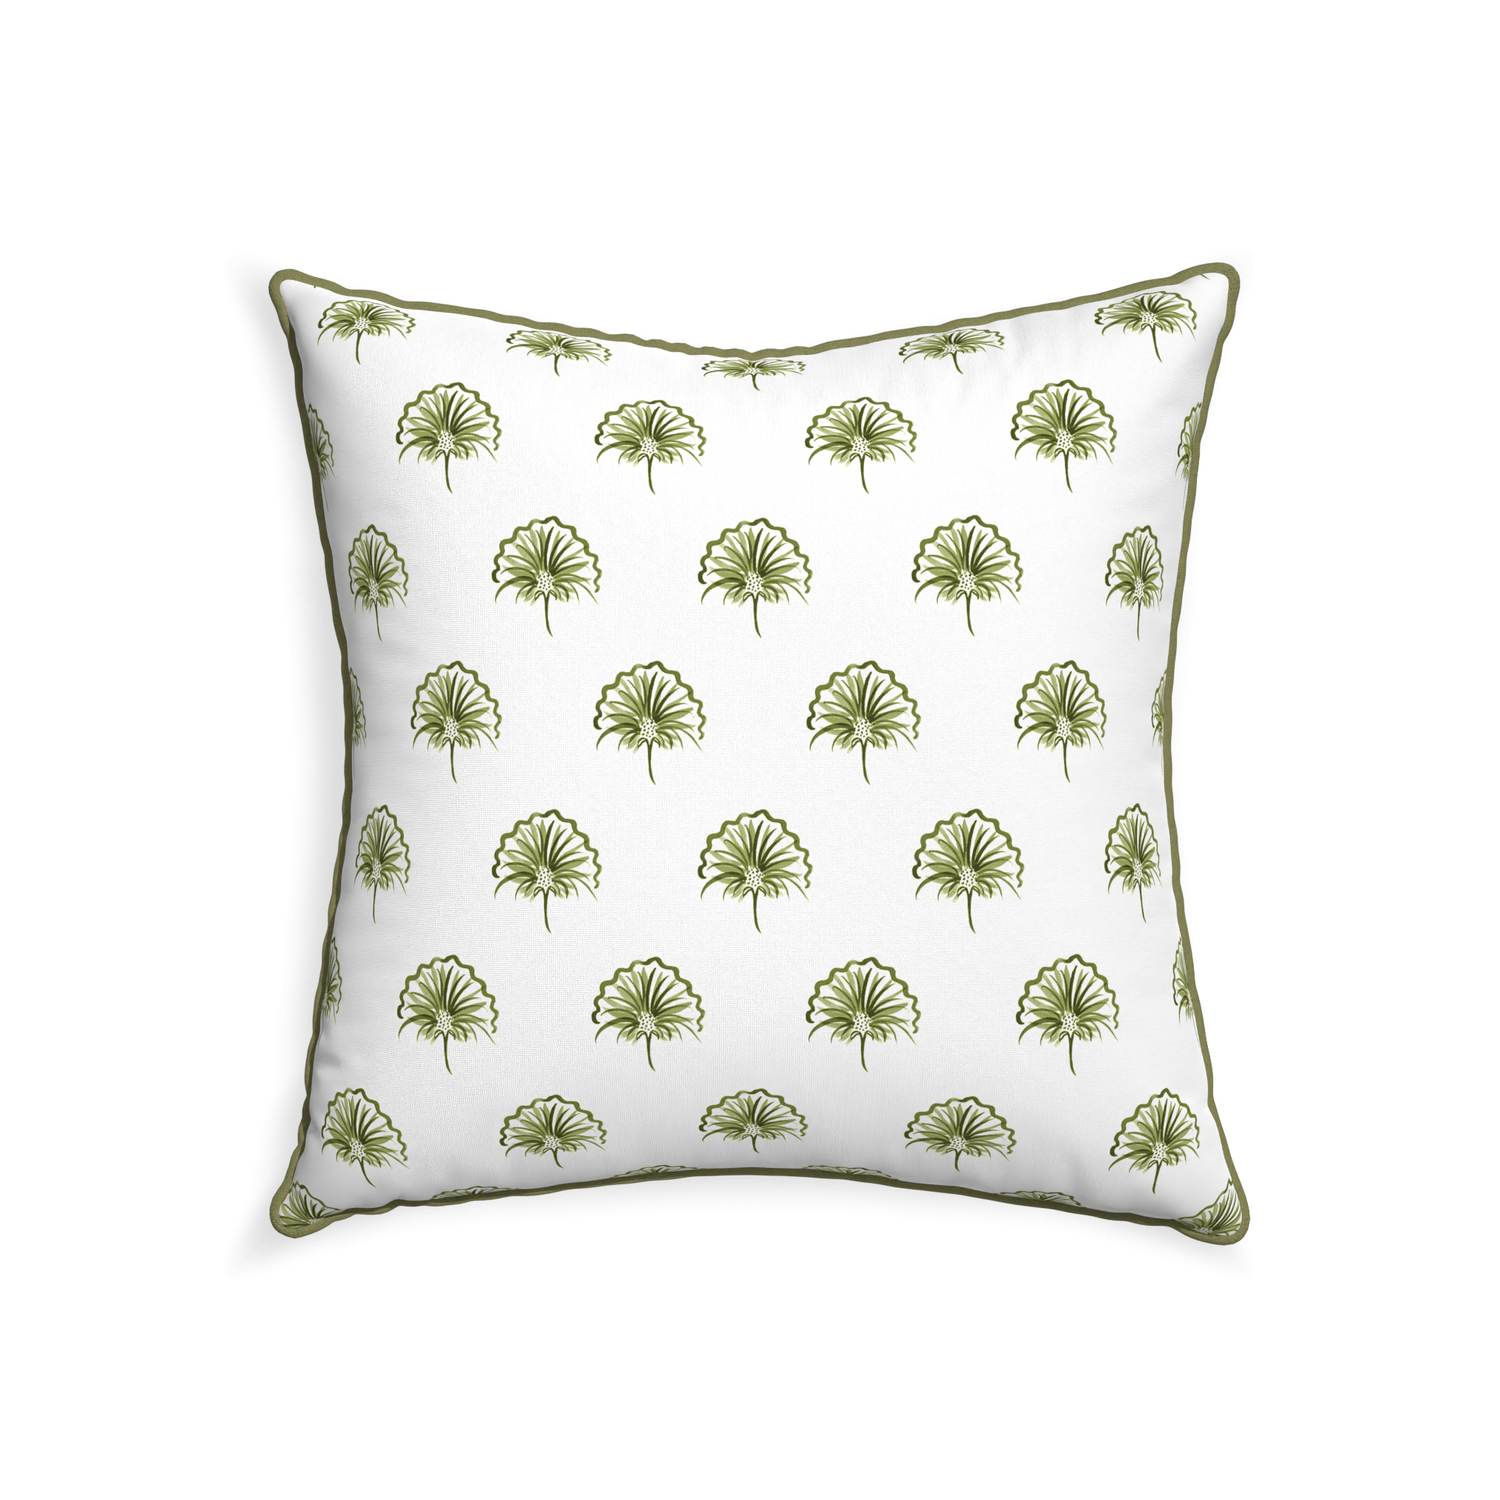 22-square penelope moss custom pillow with moss piping on white background